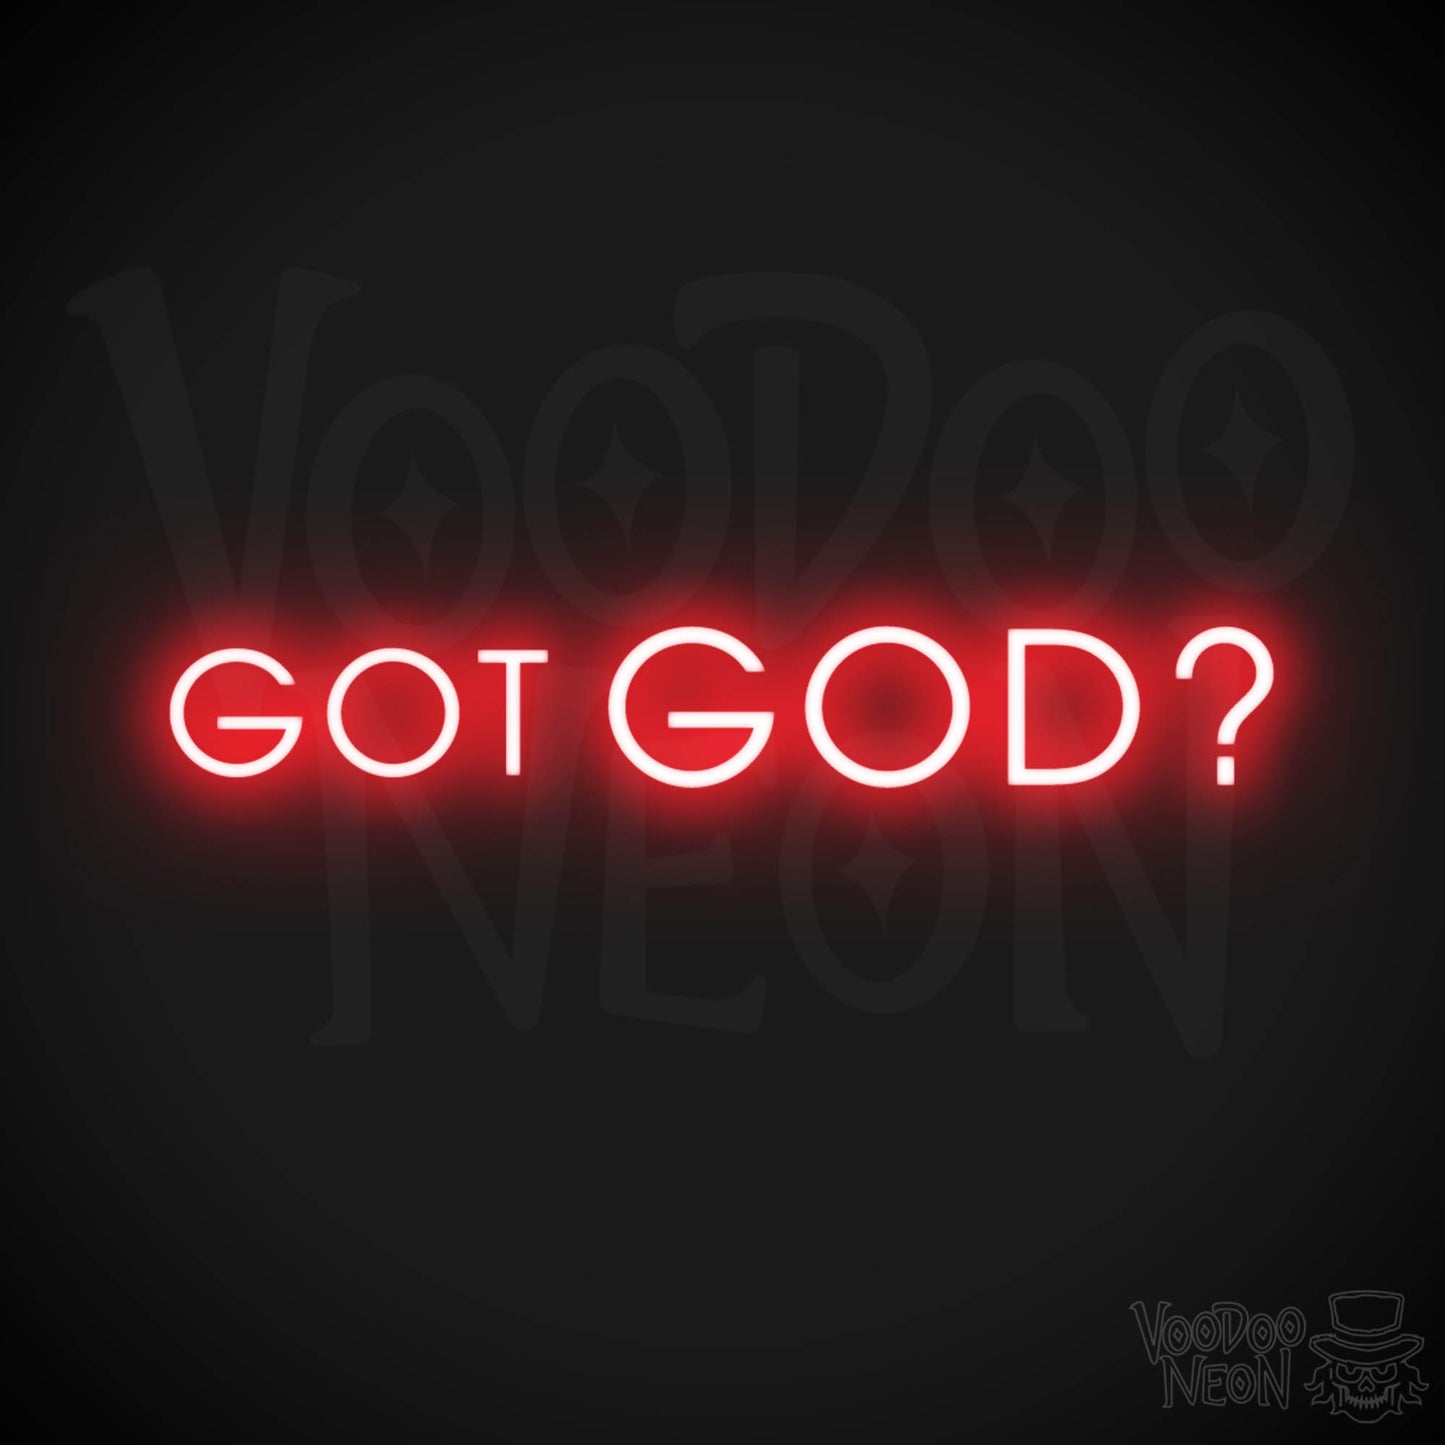 Got God Neon Sign - Neon Got God Sign - Neon God Sign - LED Wall Art - Color Red